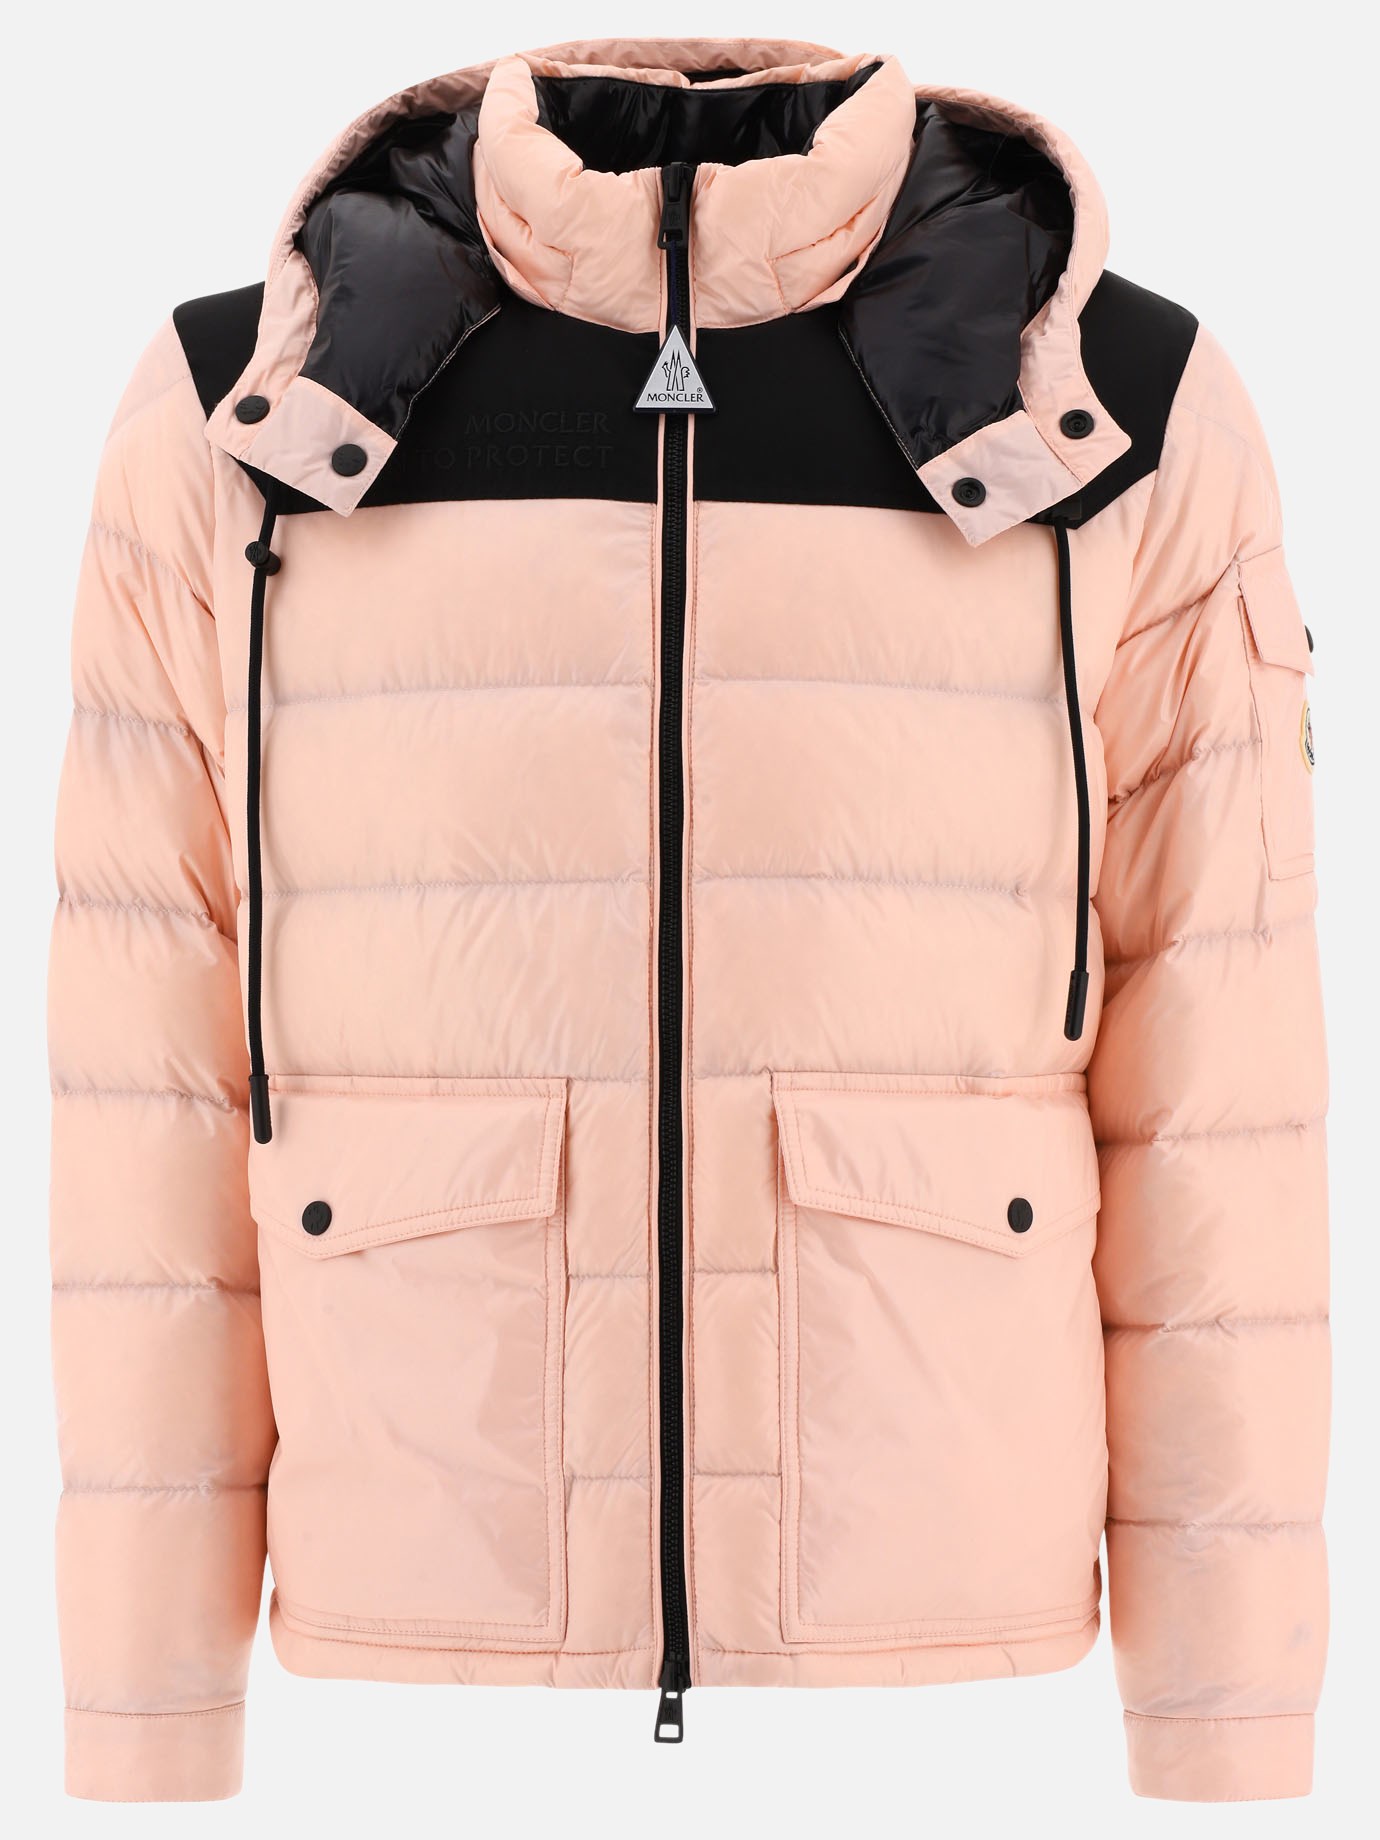  Gombei  down jacket by Moncler